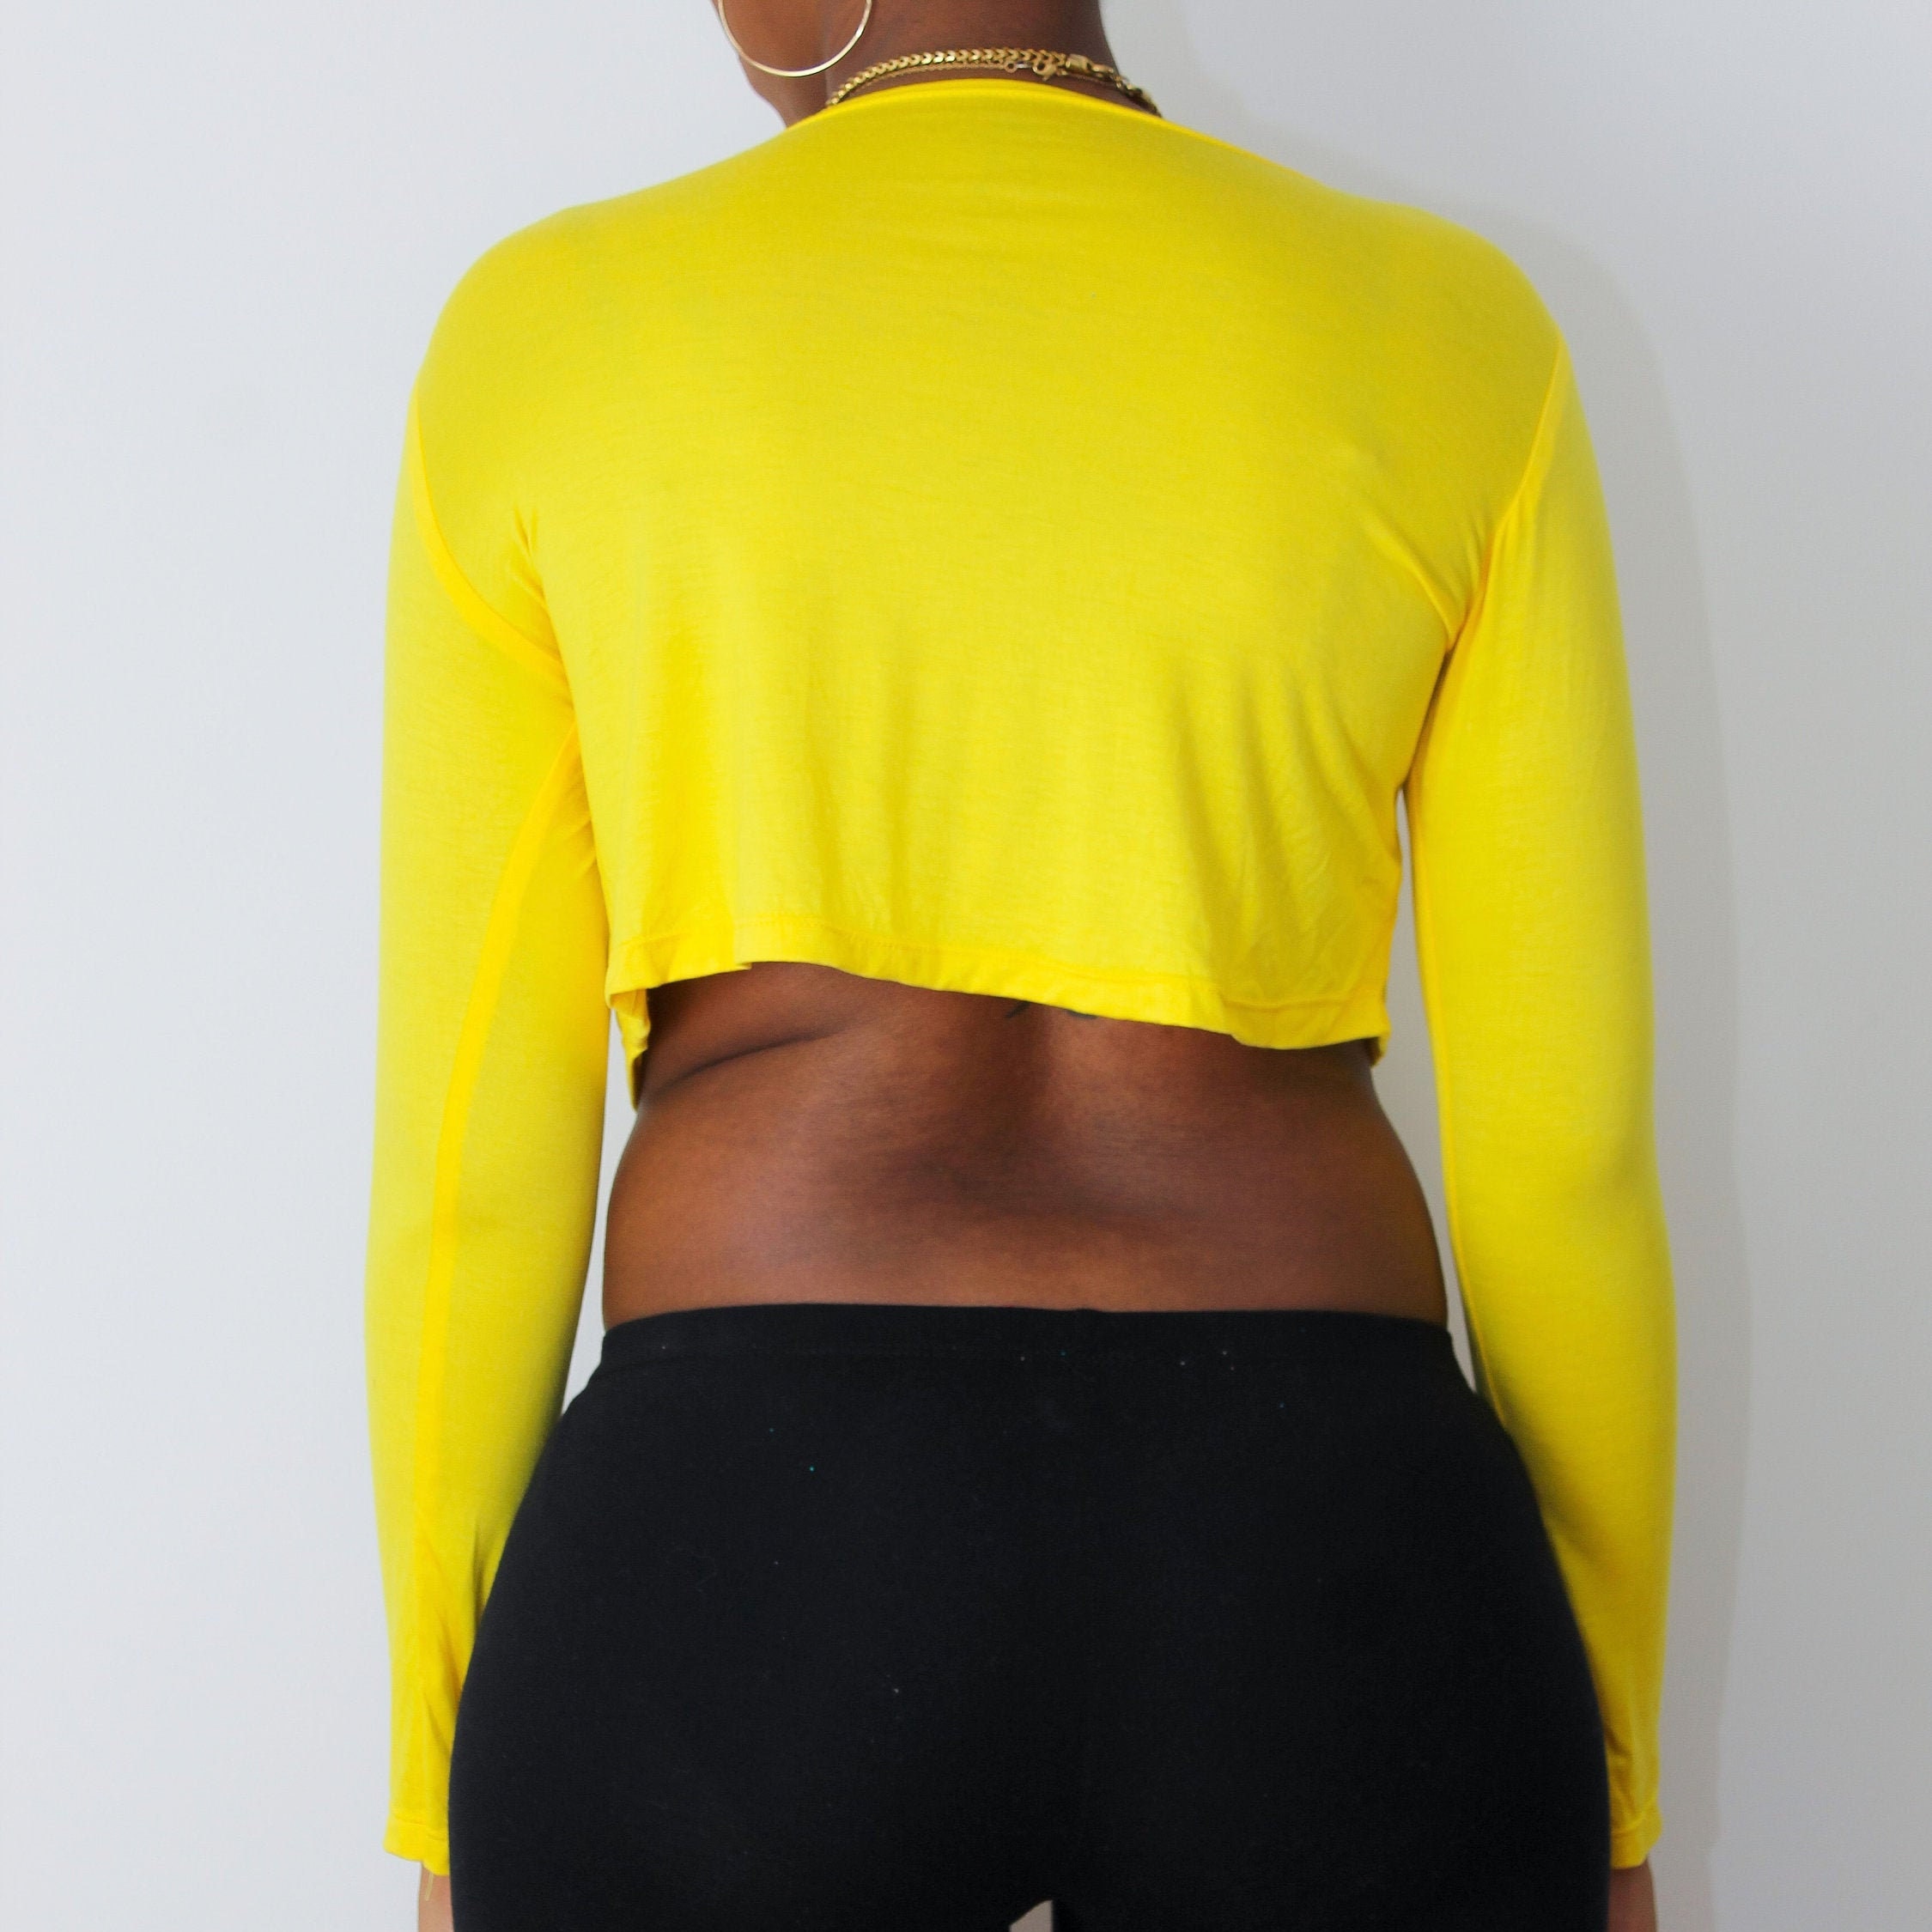 Grudge bladre ledsager Yellow Long Sleeve Crop Top Loose Crop Top Boxy Crop Top - Etsy